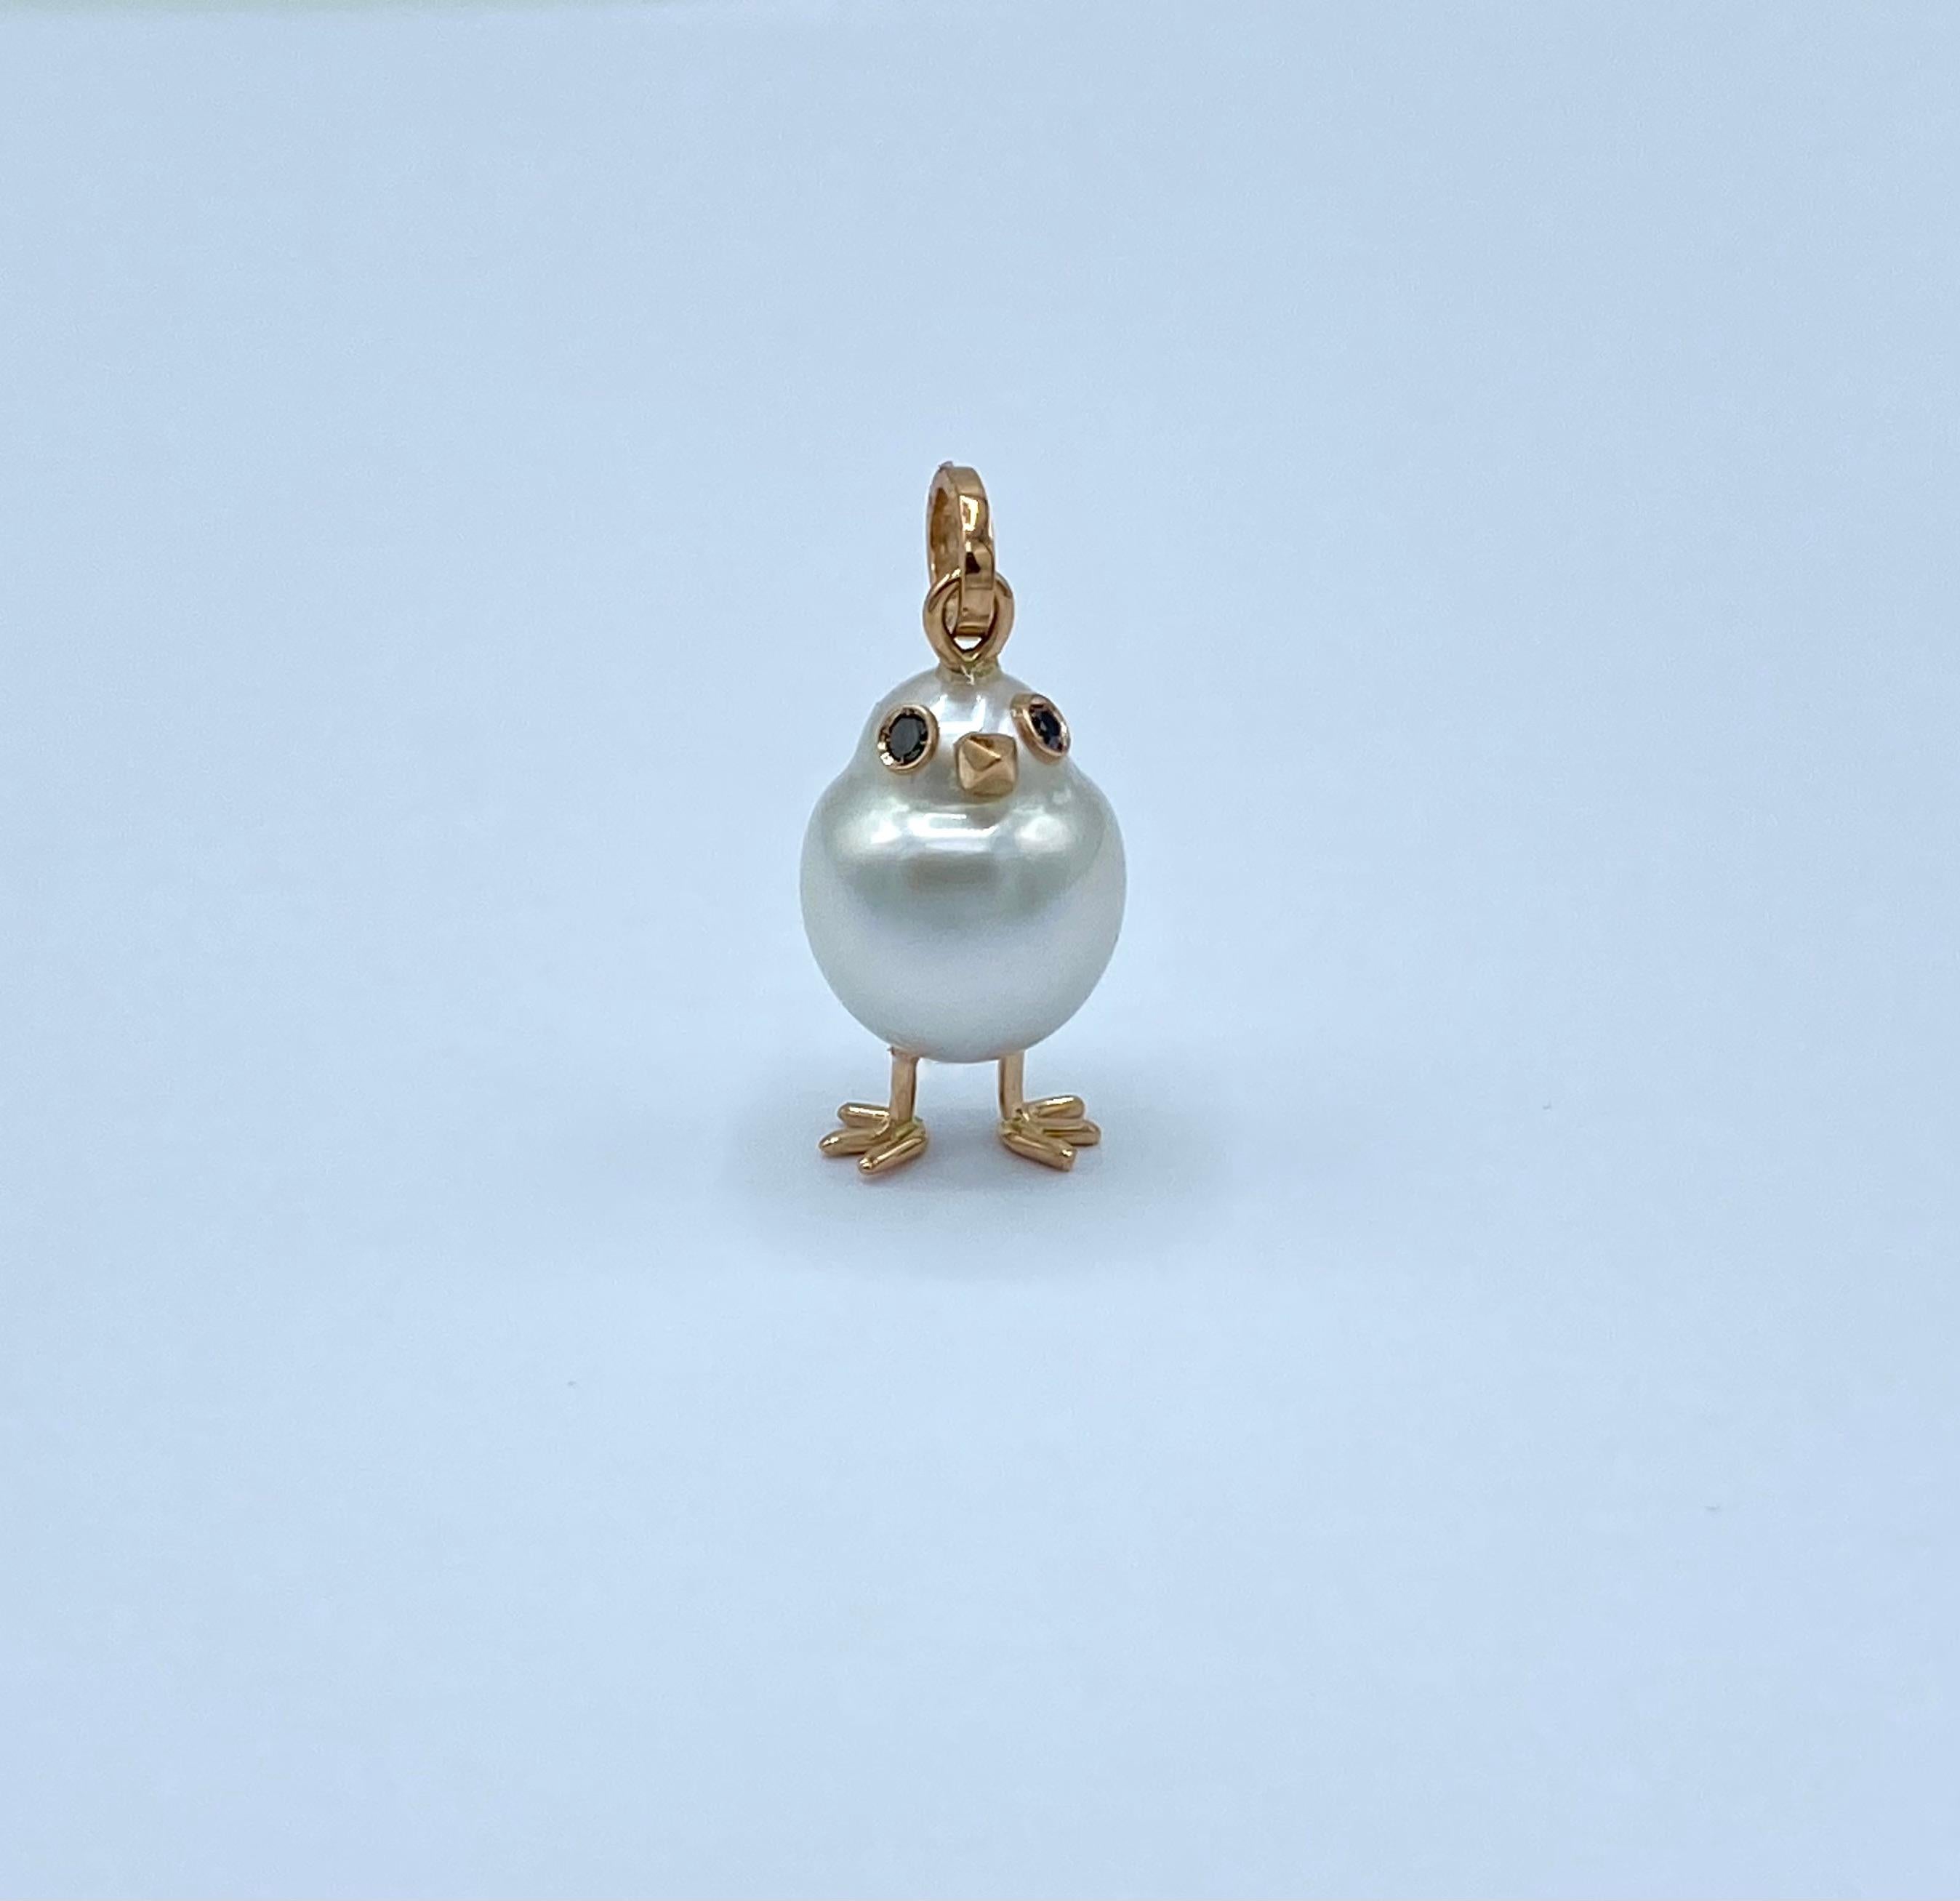 Chick Australian Pearl Diamond Red 18 Kt Gold Pendant or Necklace
A oval shape Australian pearl has been carefully crafted to make a chick. He has his two legs, two eyes encrusted with two black diamonds and his beak. 
The gold is red.
The chain is